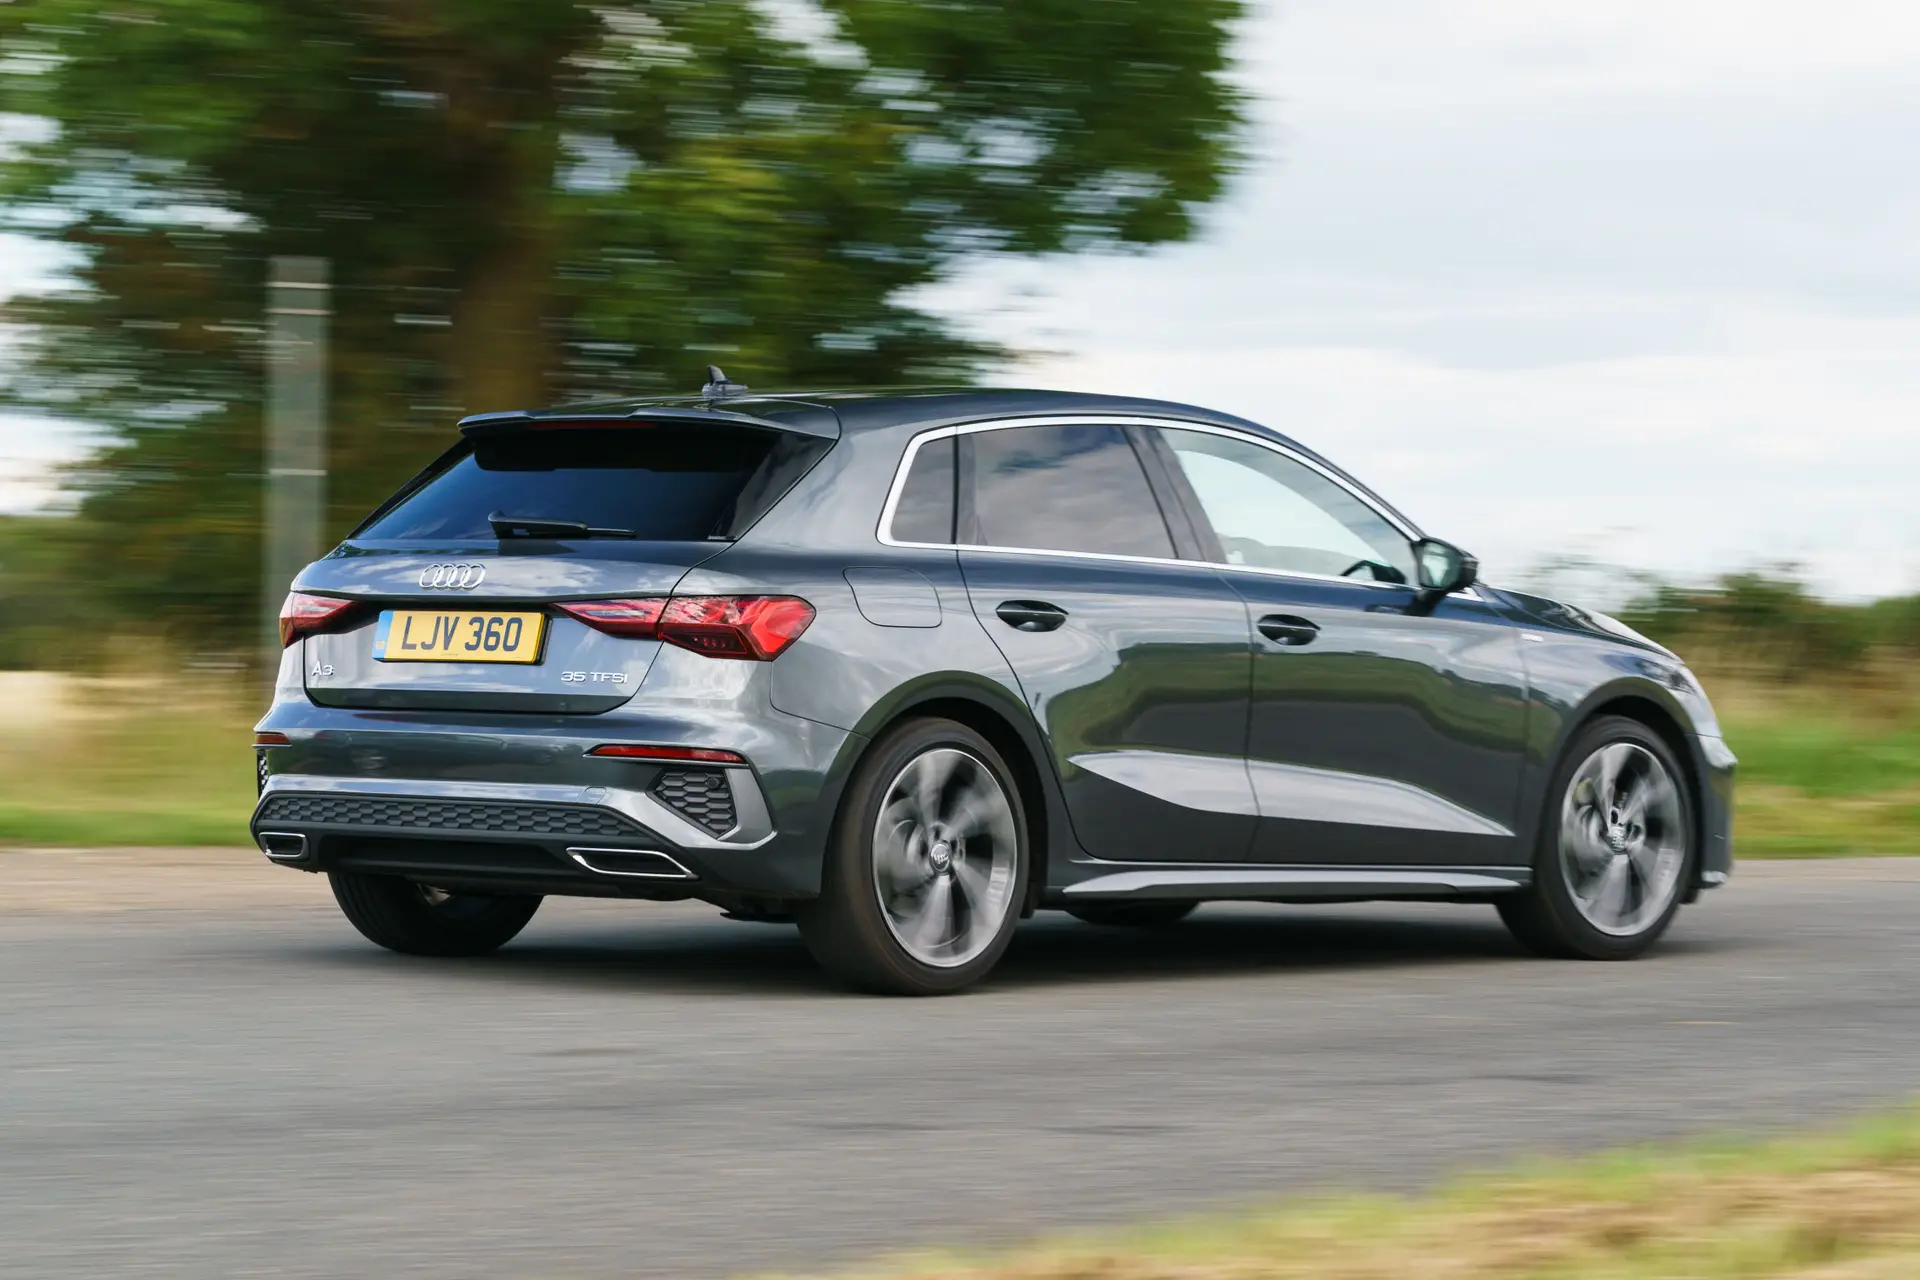 Audi A3 Review 2023: exterior rear three quarter photo of the Audi A3 Sportback on the road